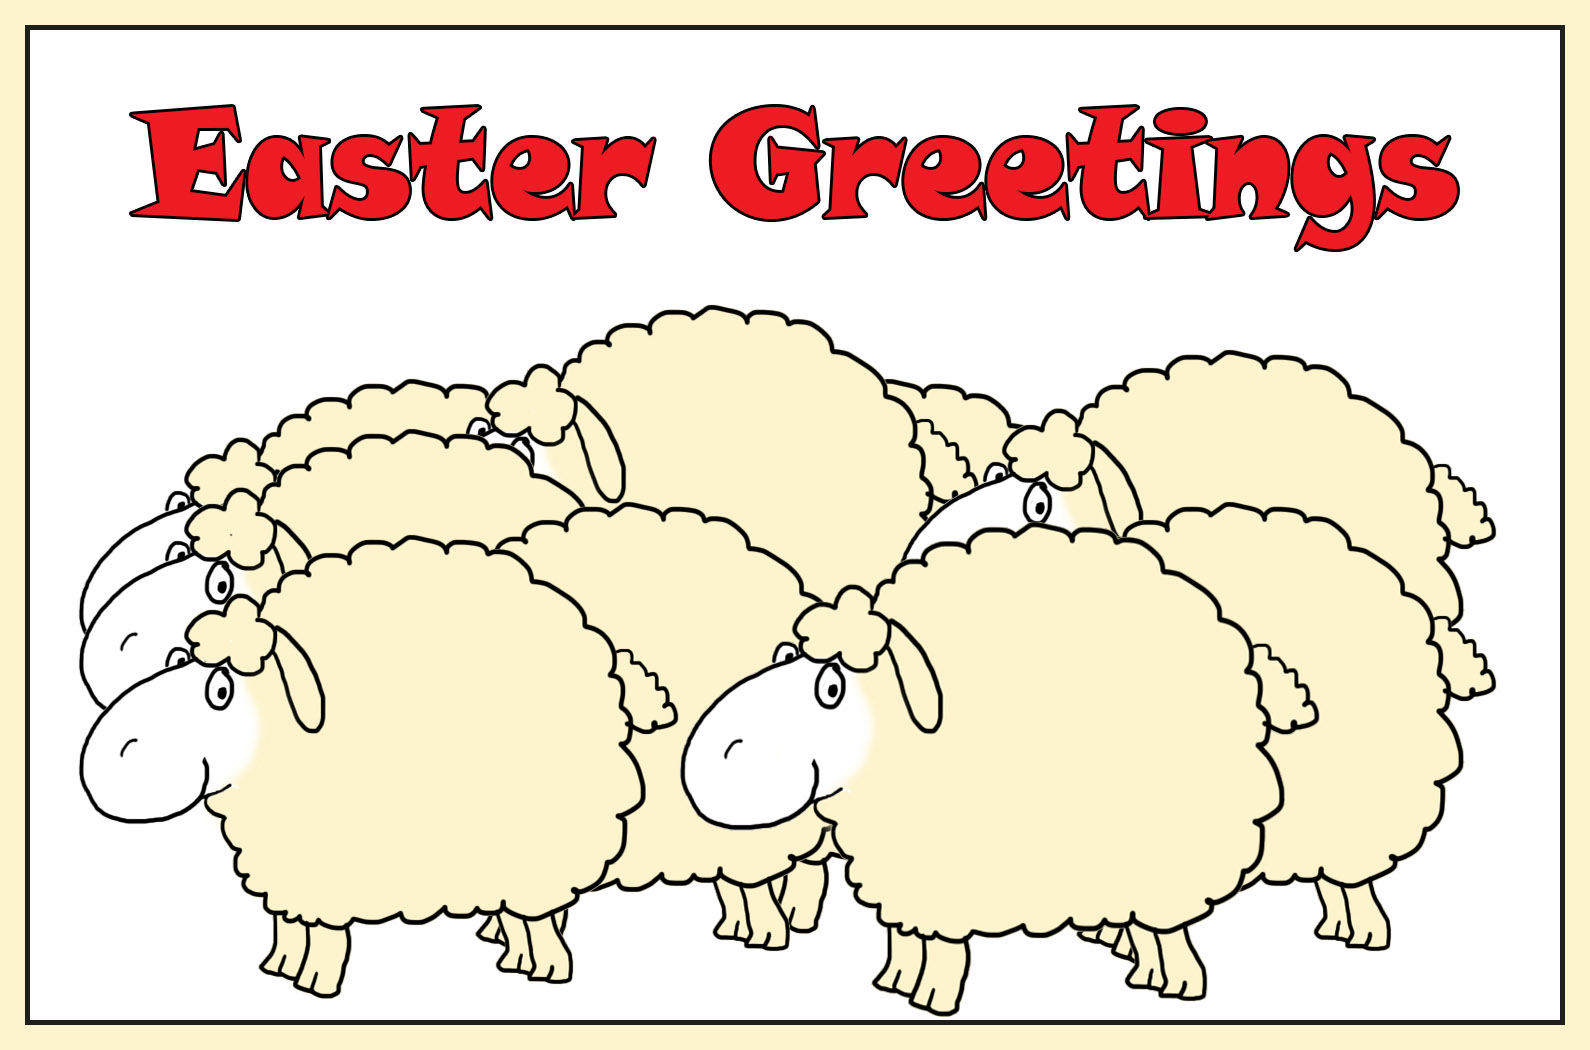 Easter greeting card with lots of sheep